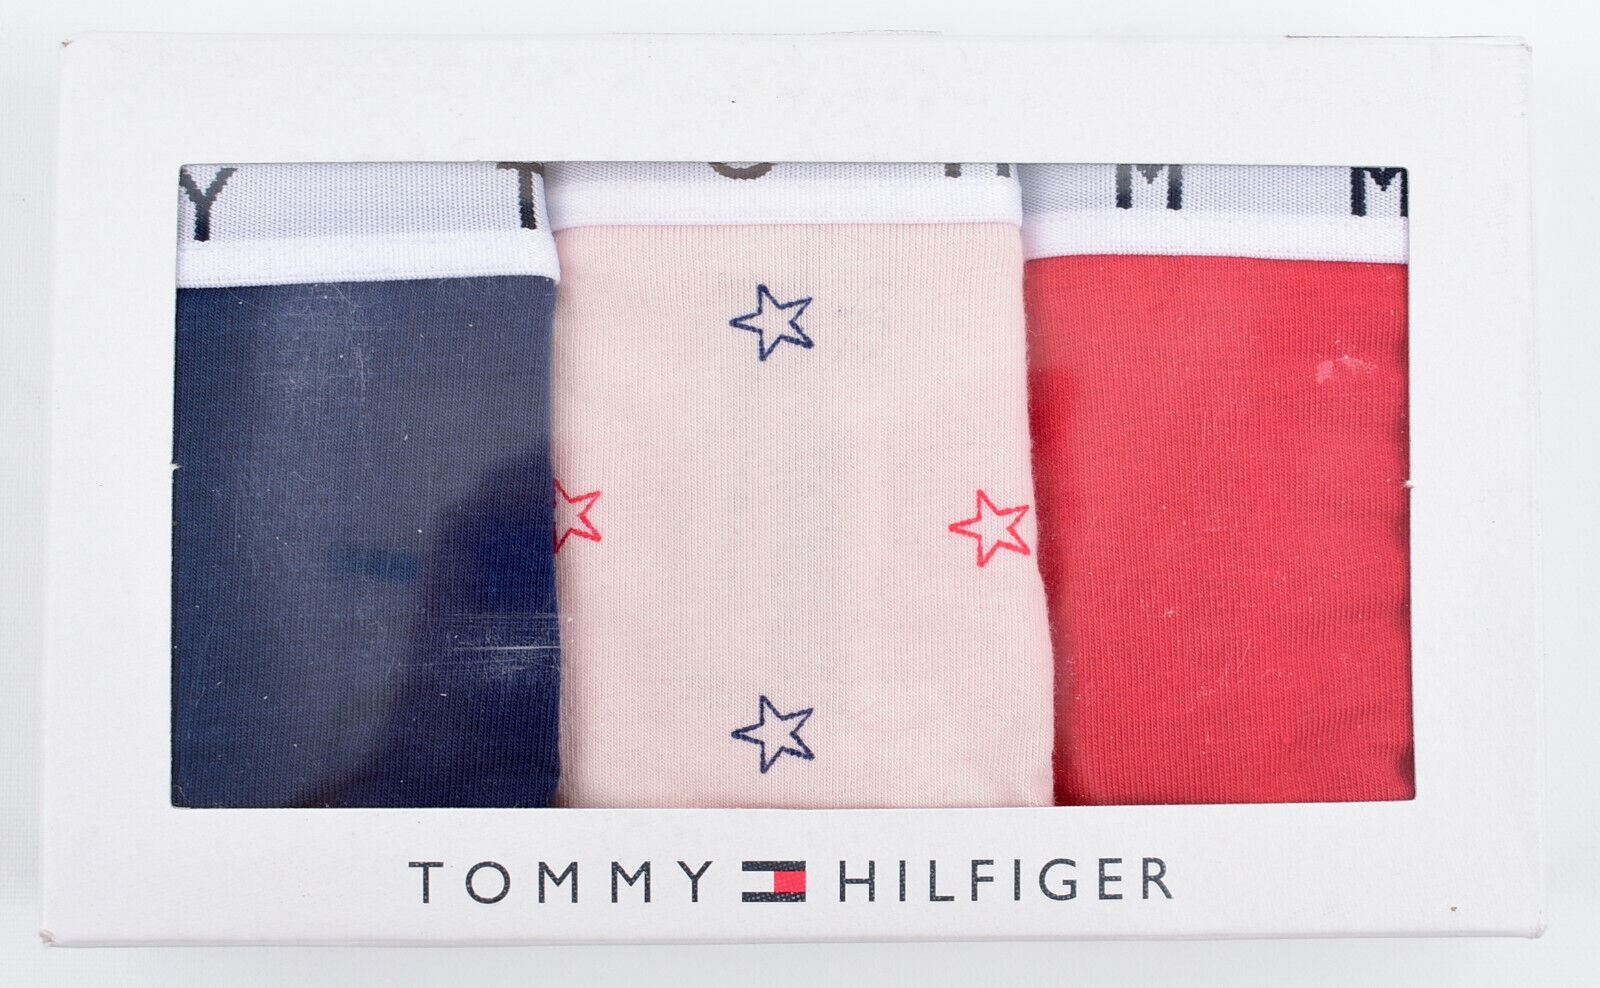 TOMMY HILFIGER Women's 3-pack Thongs Knickers Set, Navy/Pink/Red, size M /UK 12